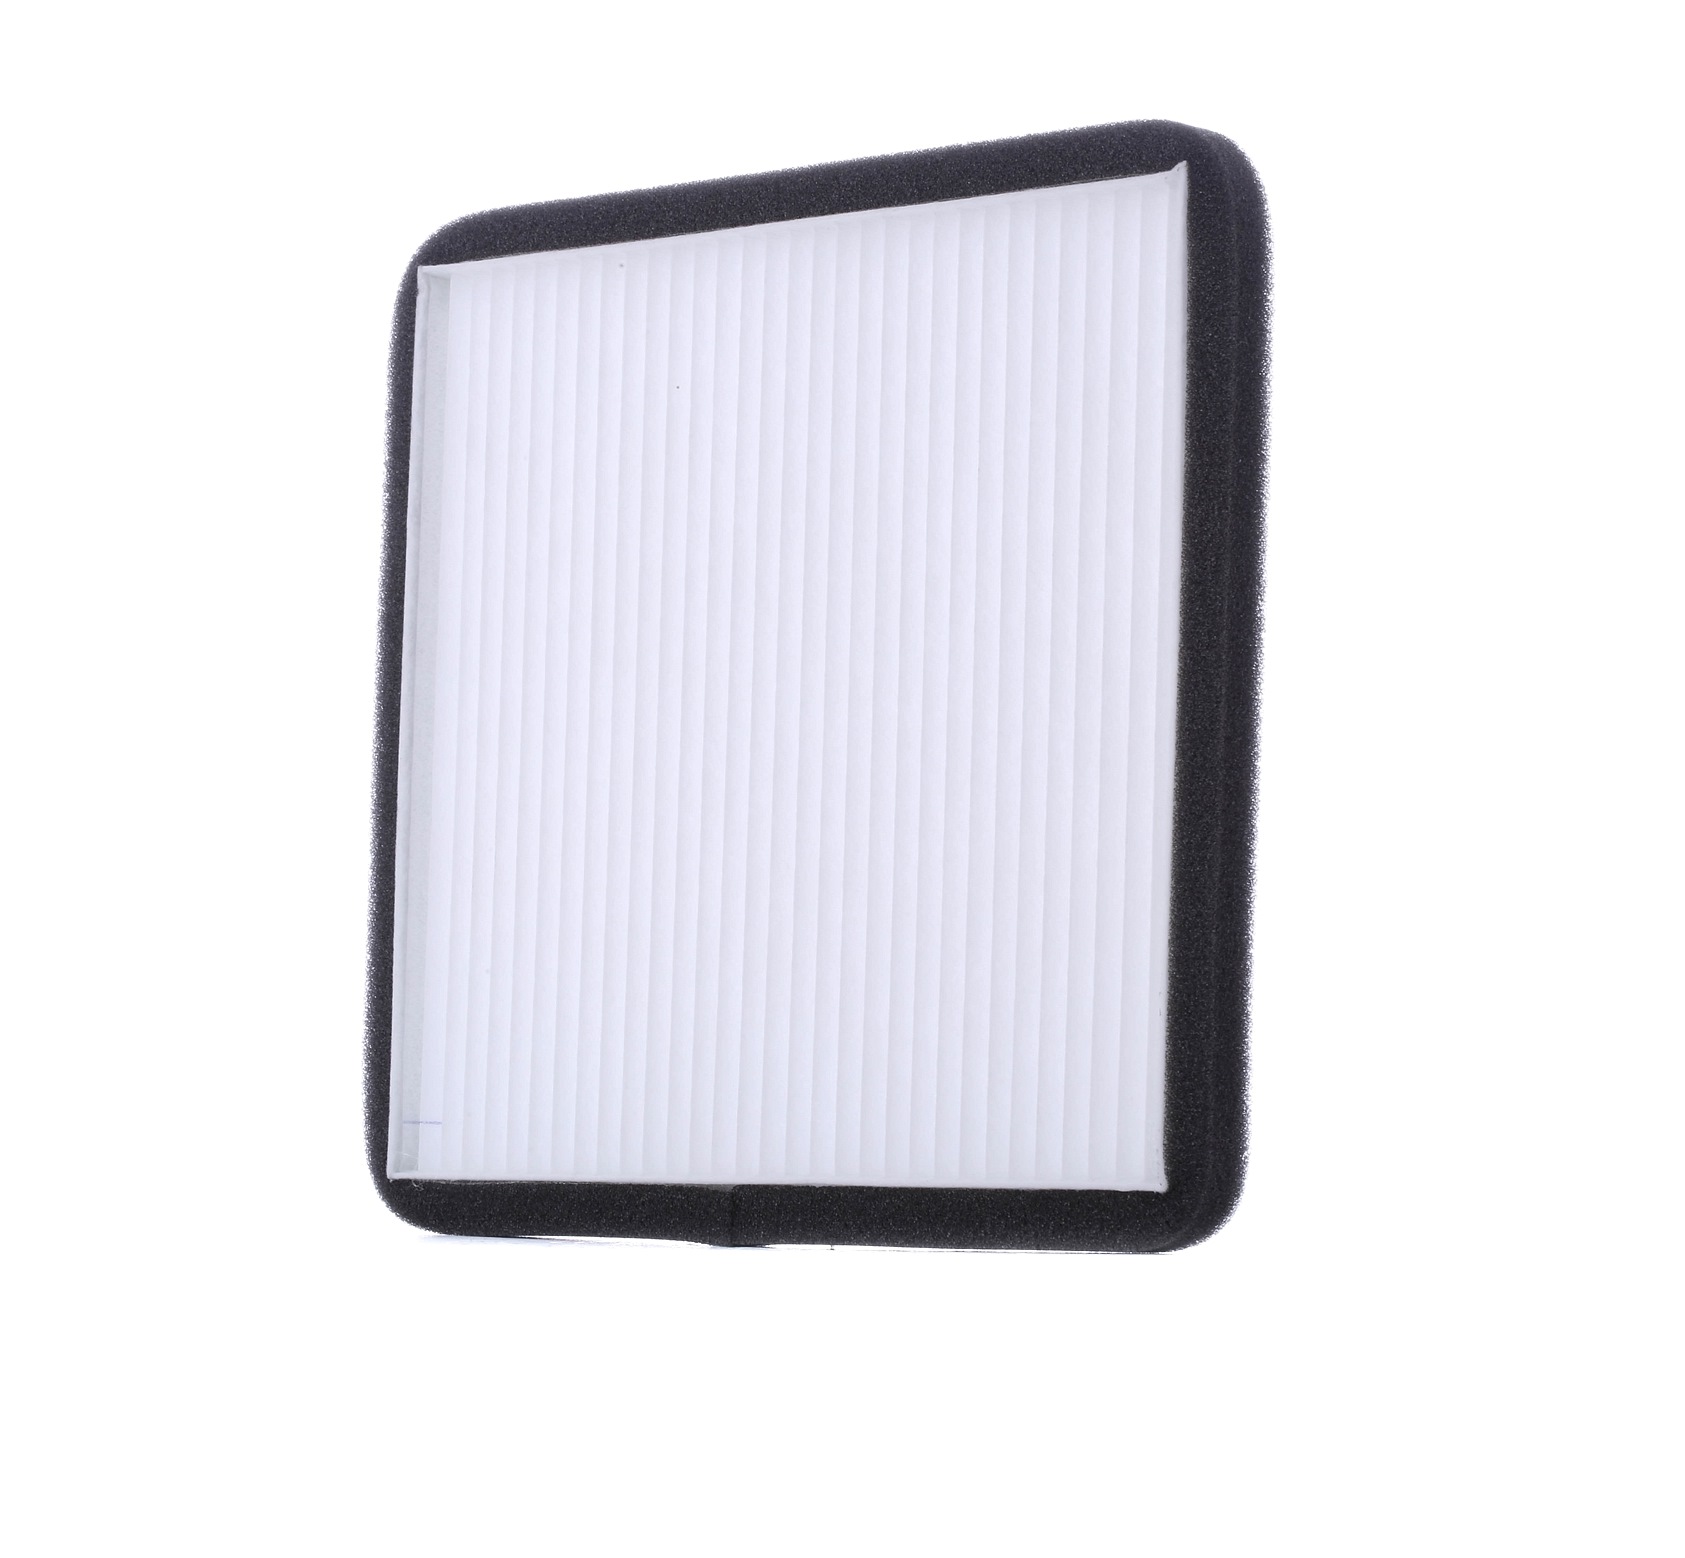 RIDEX Particulate Filter, 200 mm x 187 mm x 20 mm Width: 187mm, Height: 20mm, Length: 200mm Cabin filter 424I0158 buy